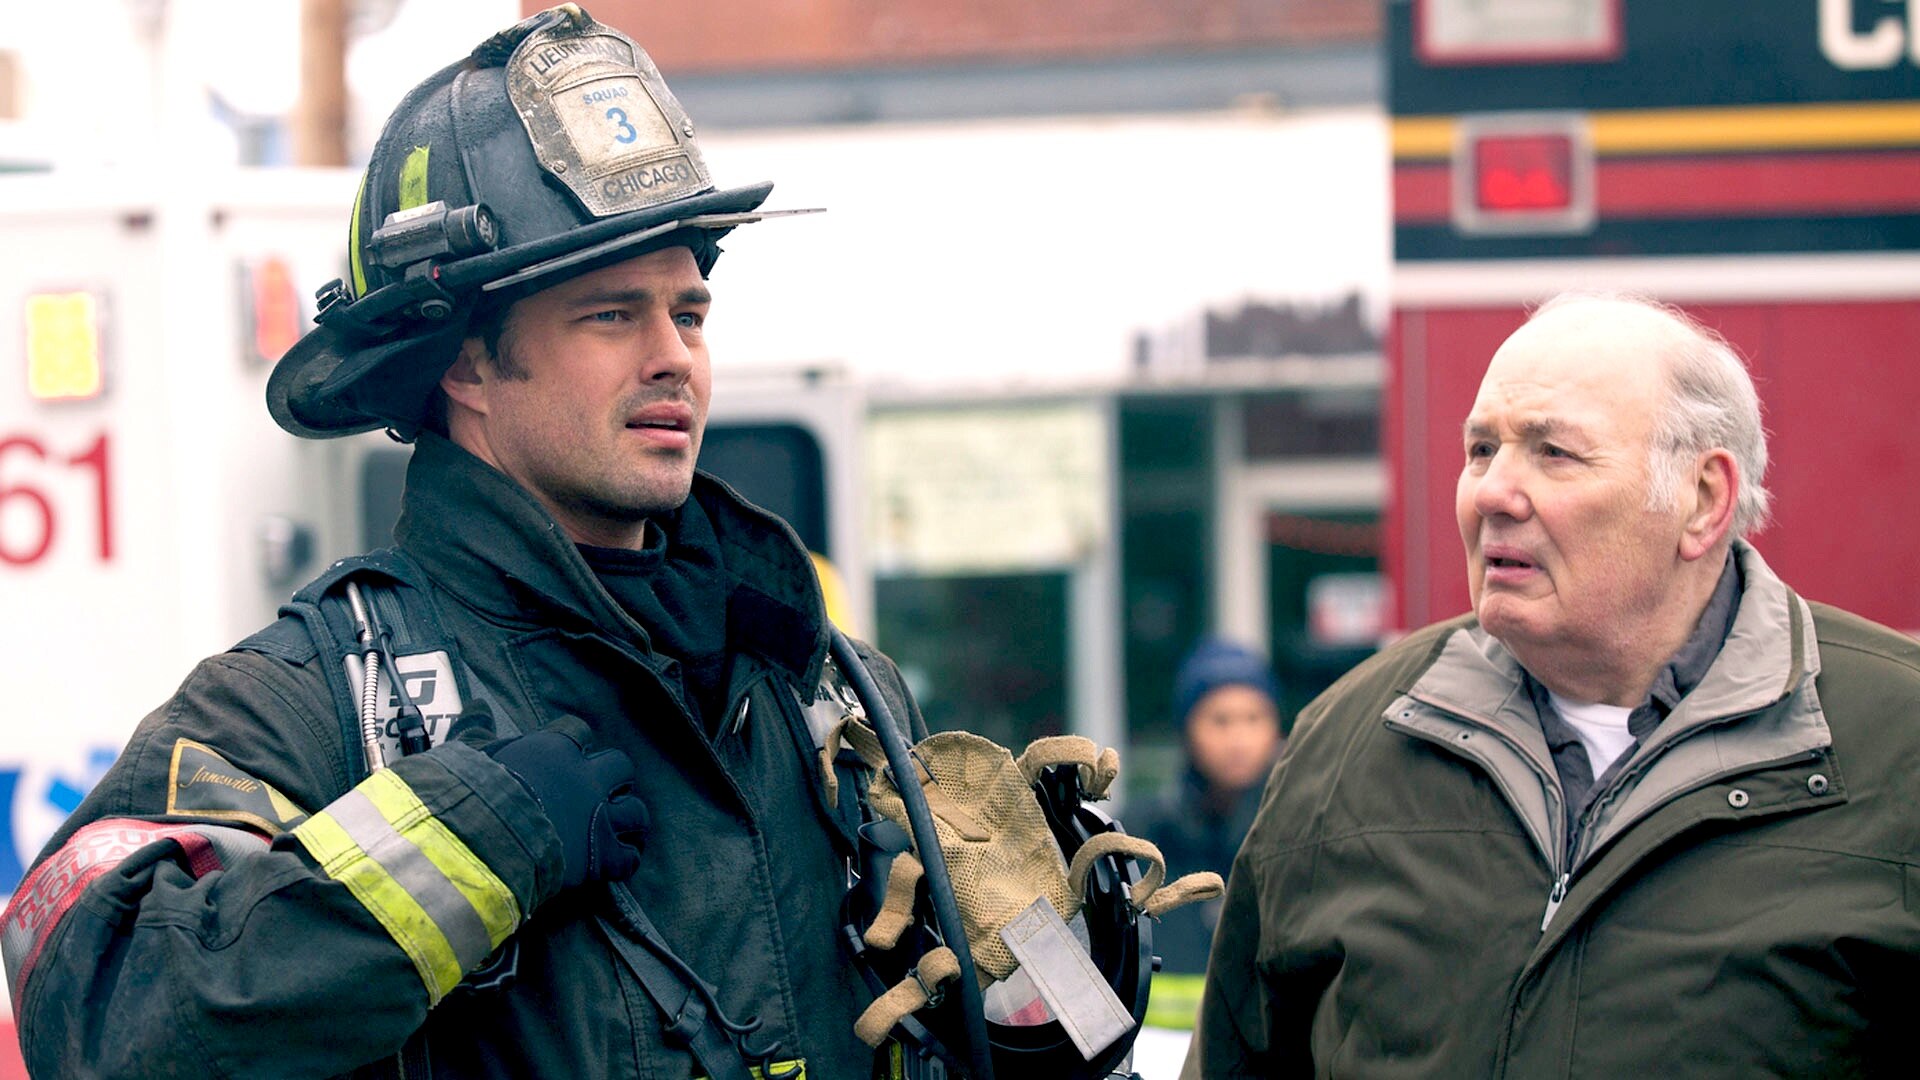 Chicago fire premiered first in 2012, and chicago p.d. came next via a chic...